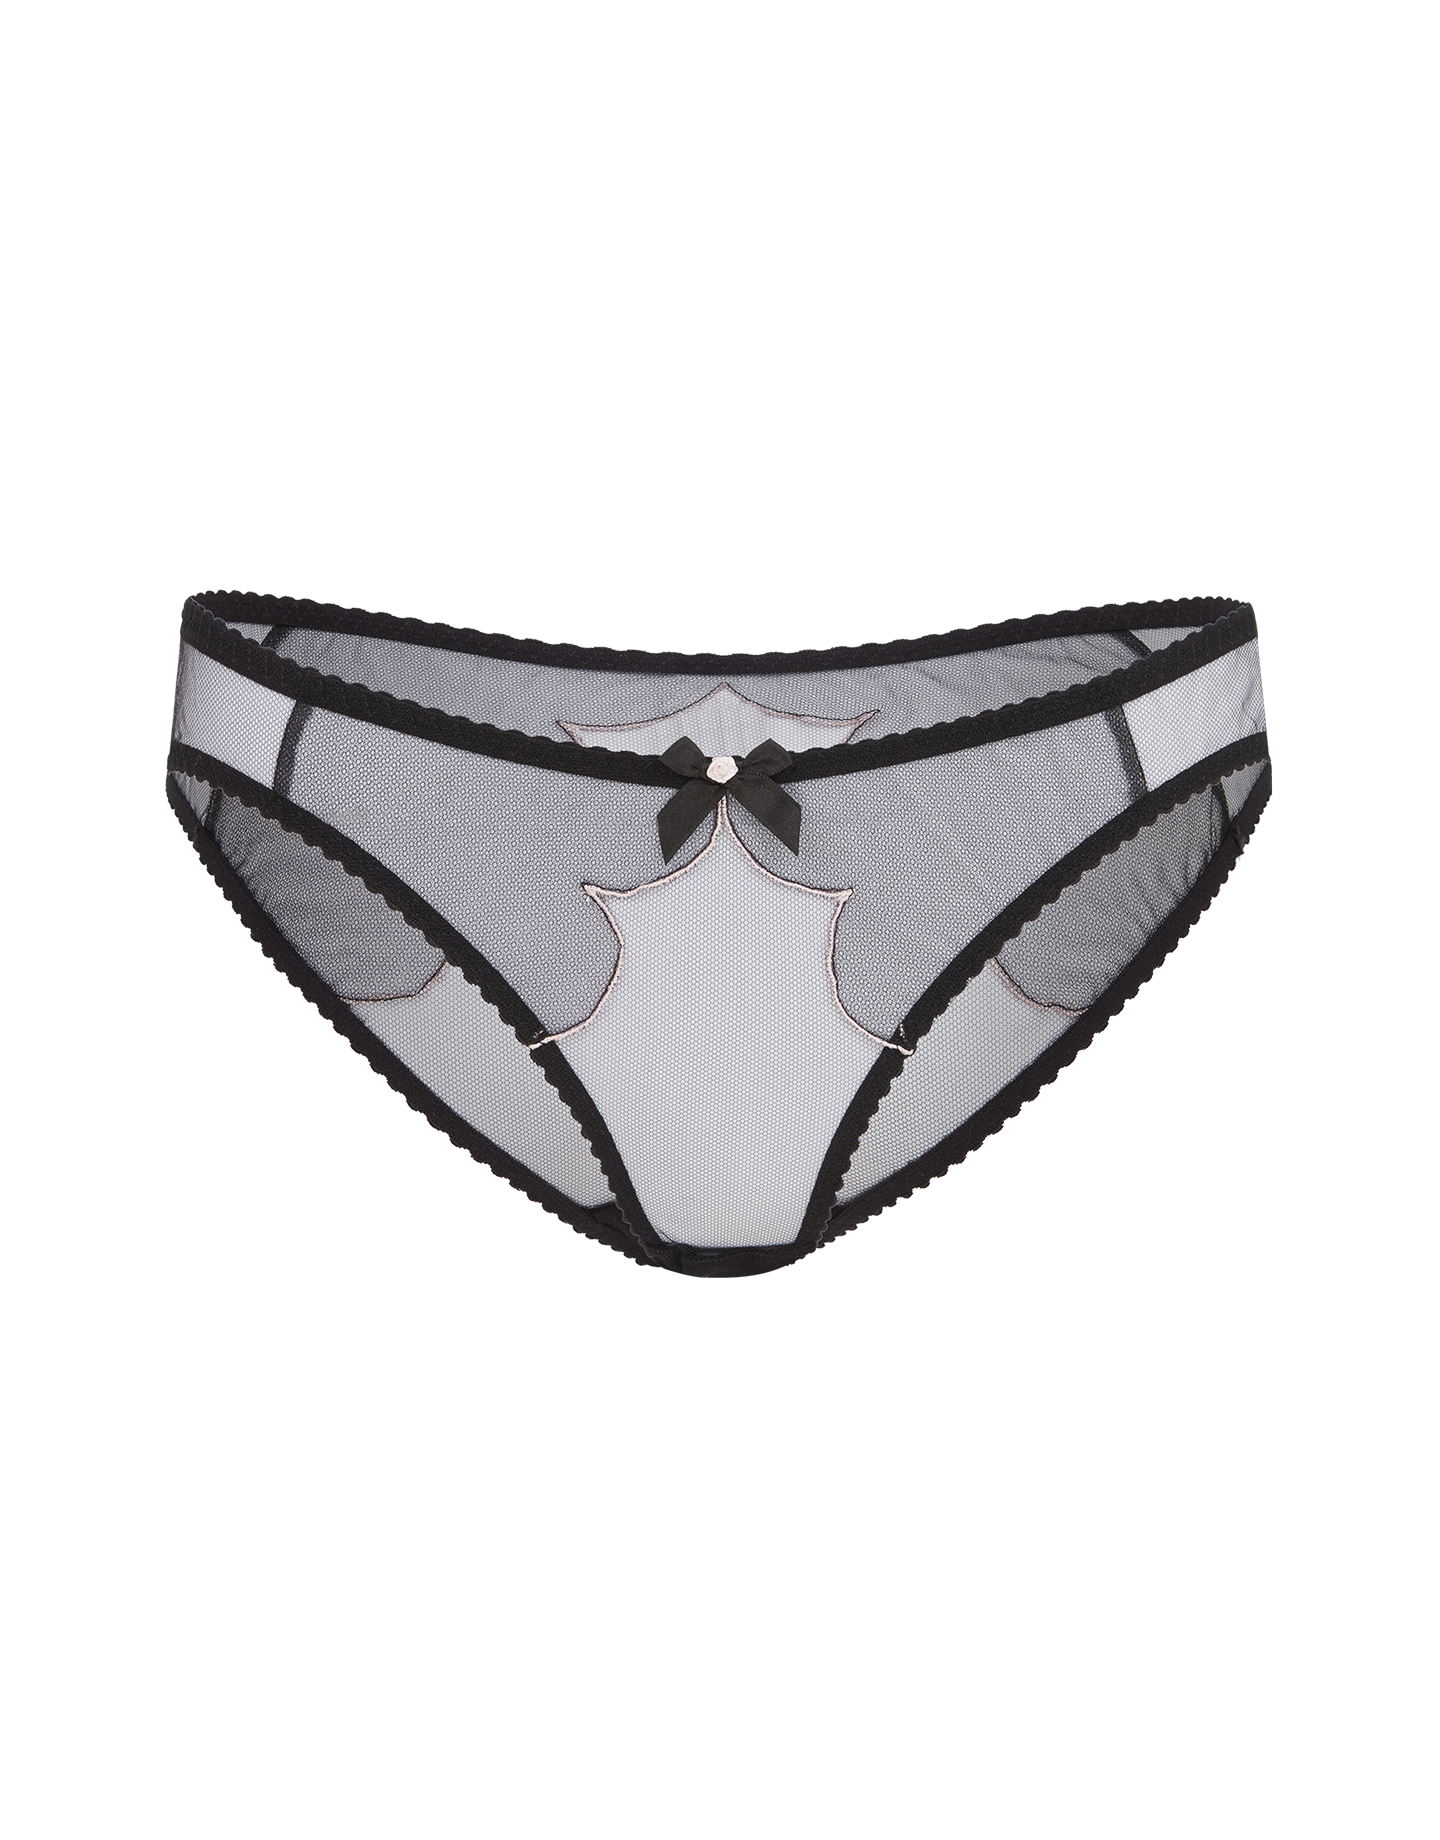 Lorna Full Brief In Black Agent Provocateur All Lingerie